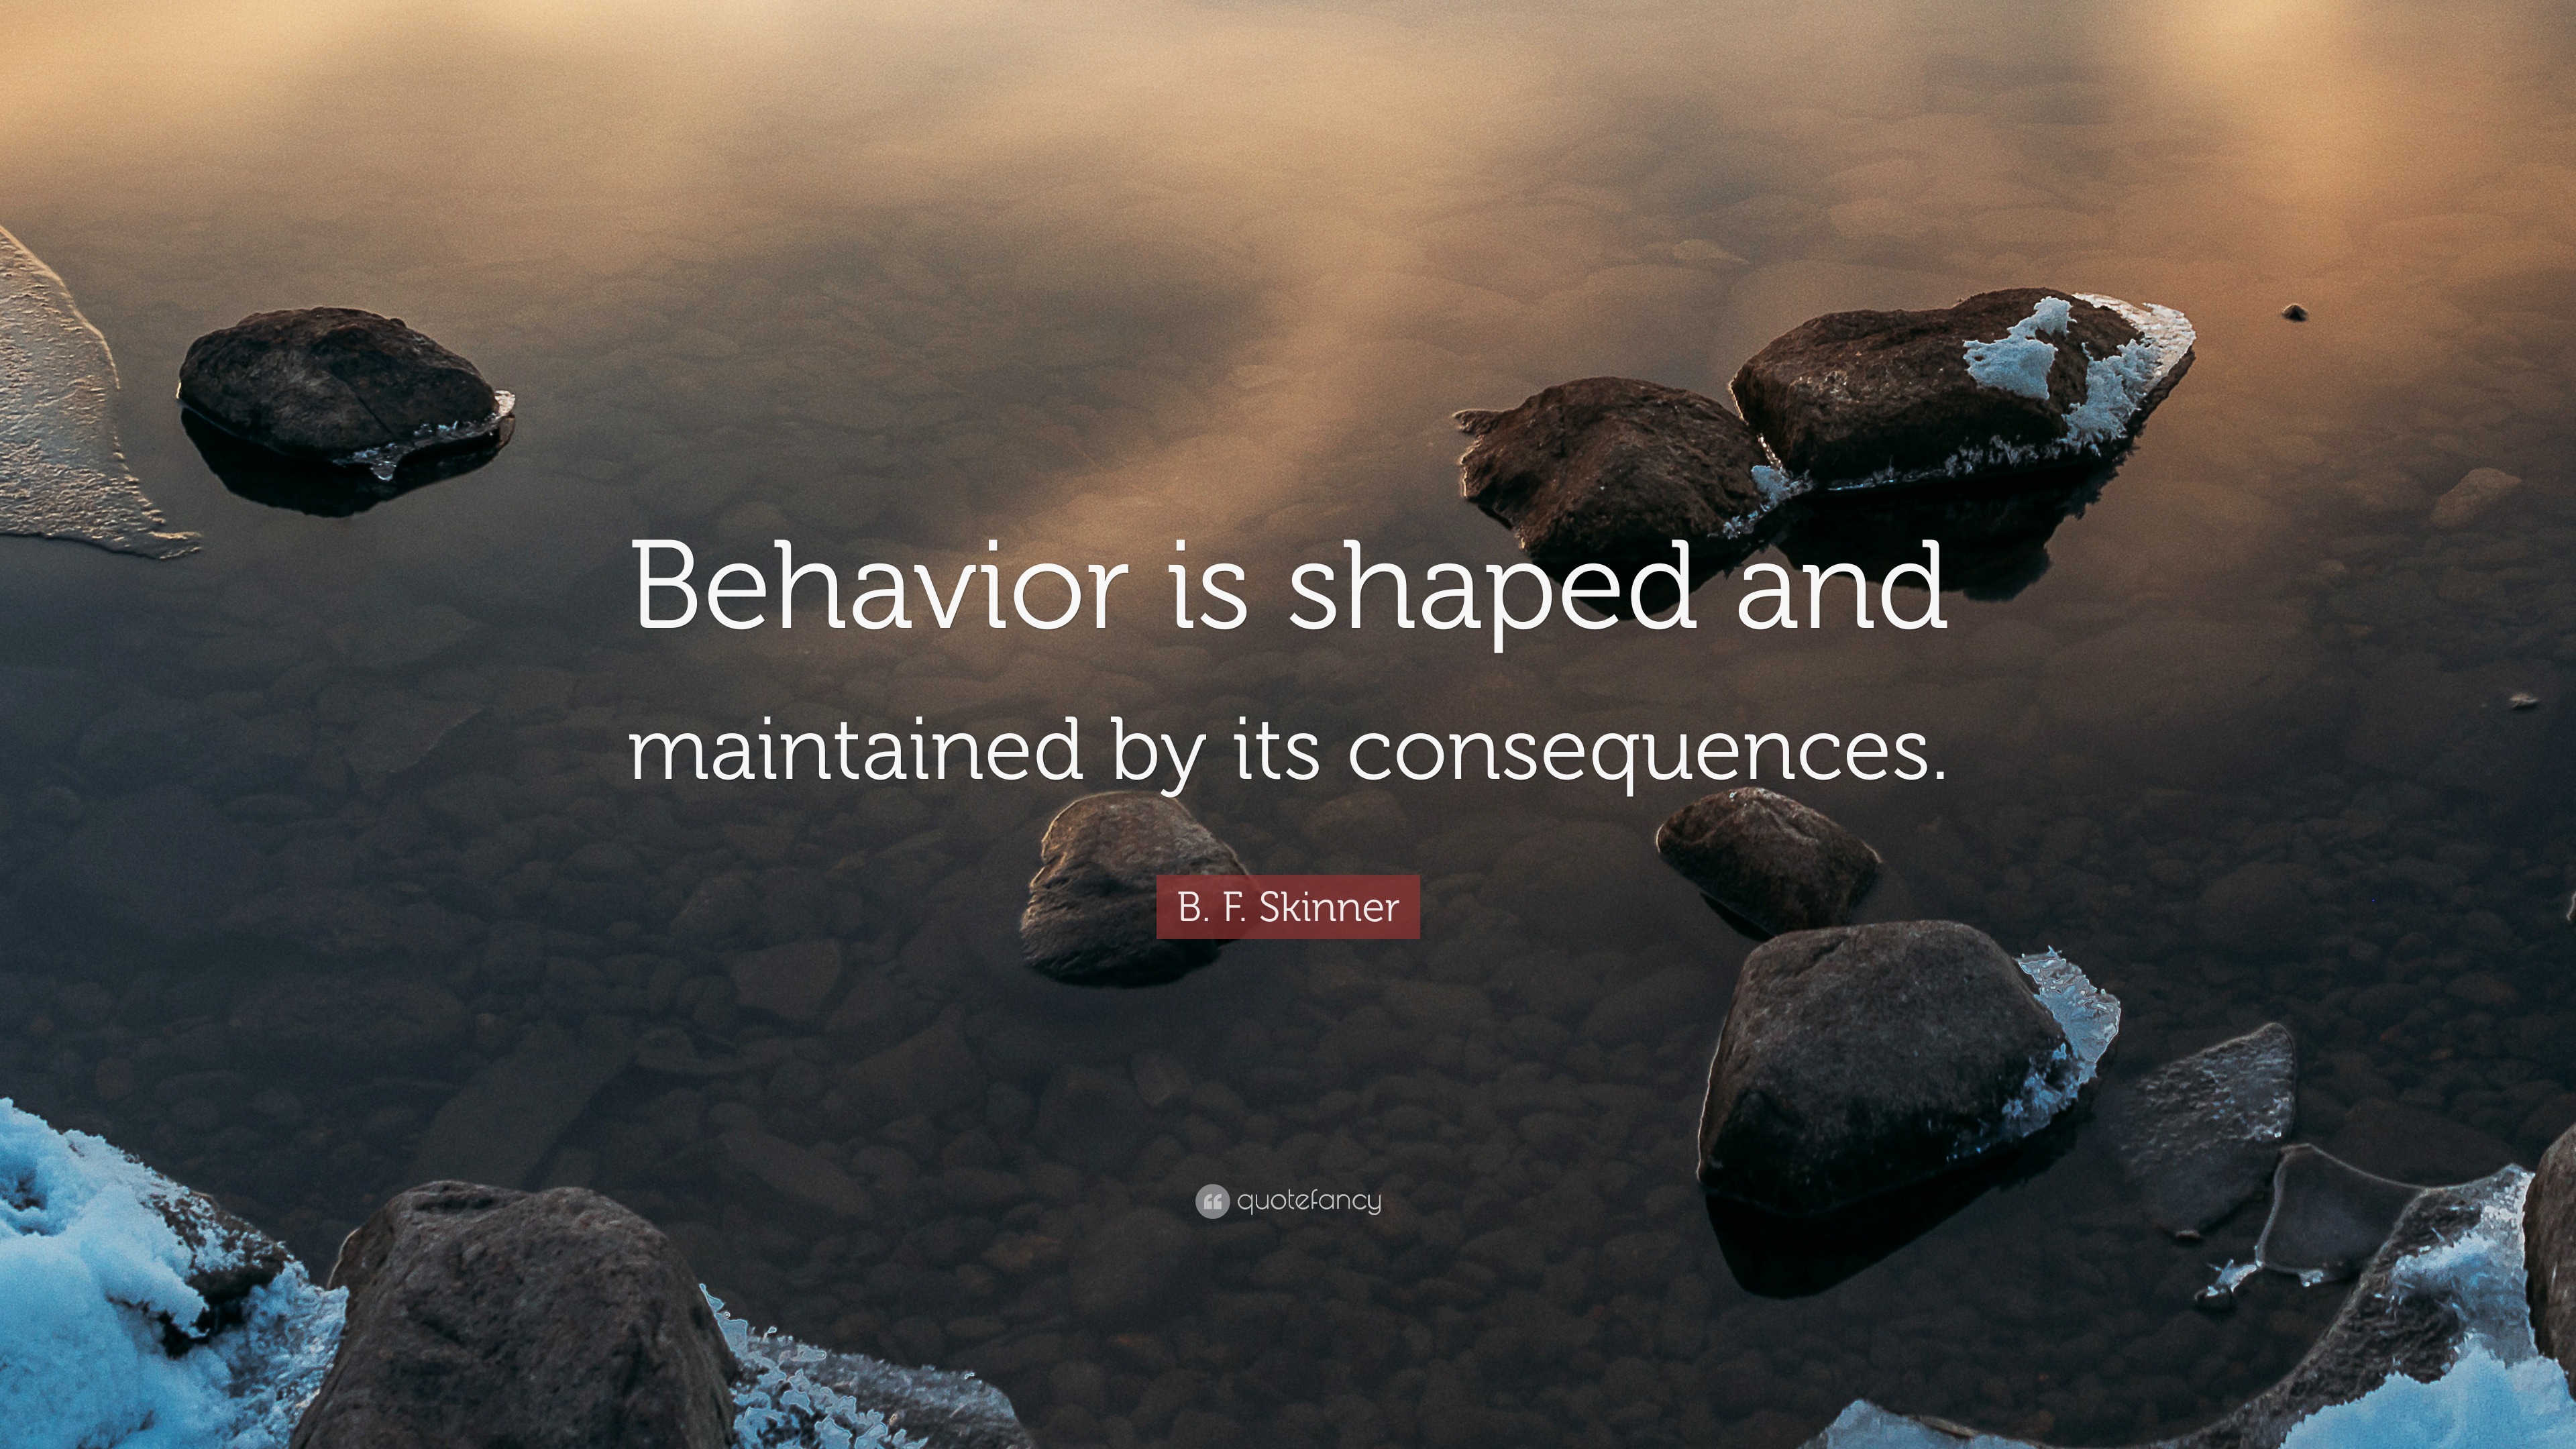 agzb9stam3uxlm https quotefancy com quote 1416890 b f skinner behavior is shaped and maintained by its consequences